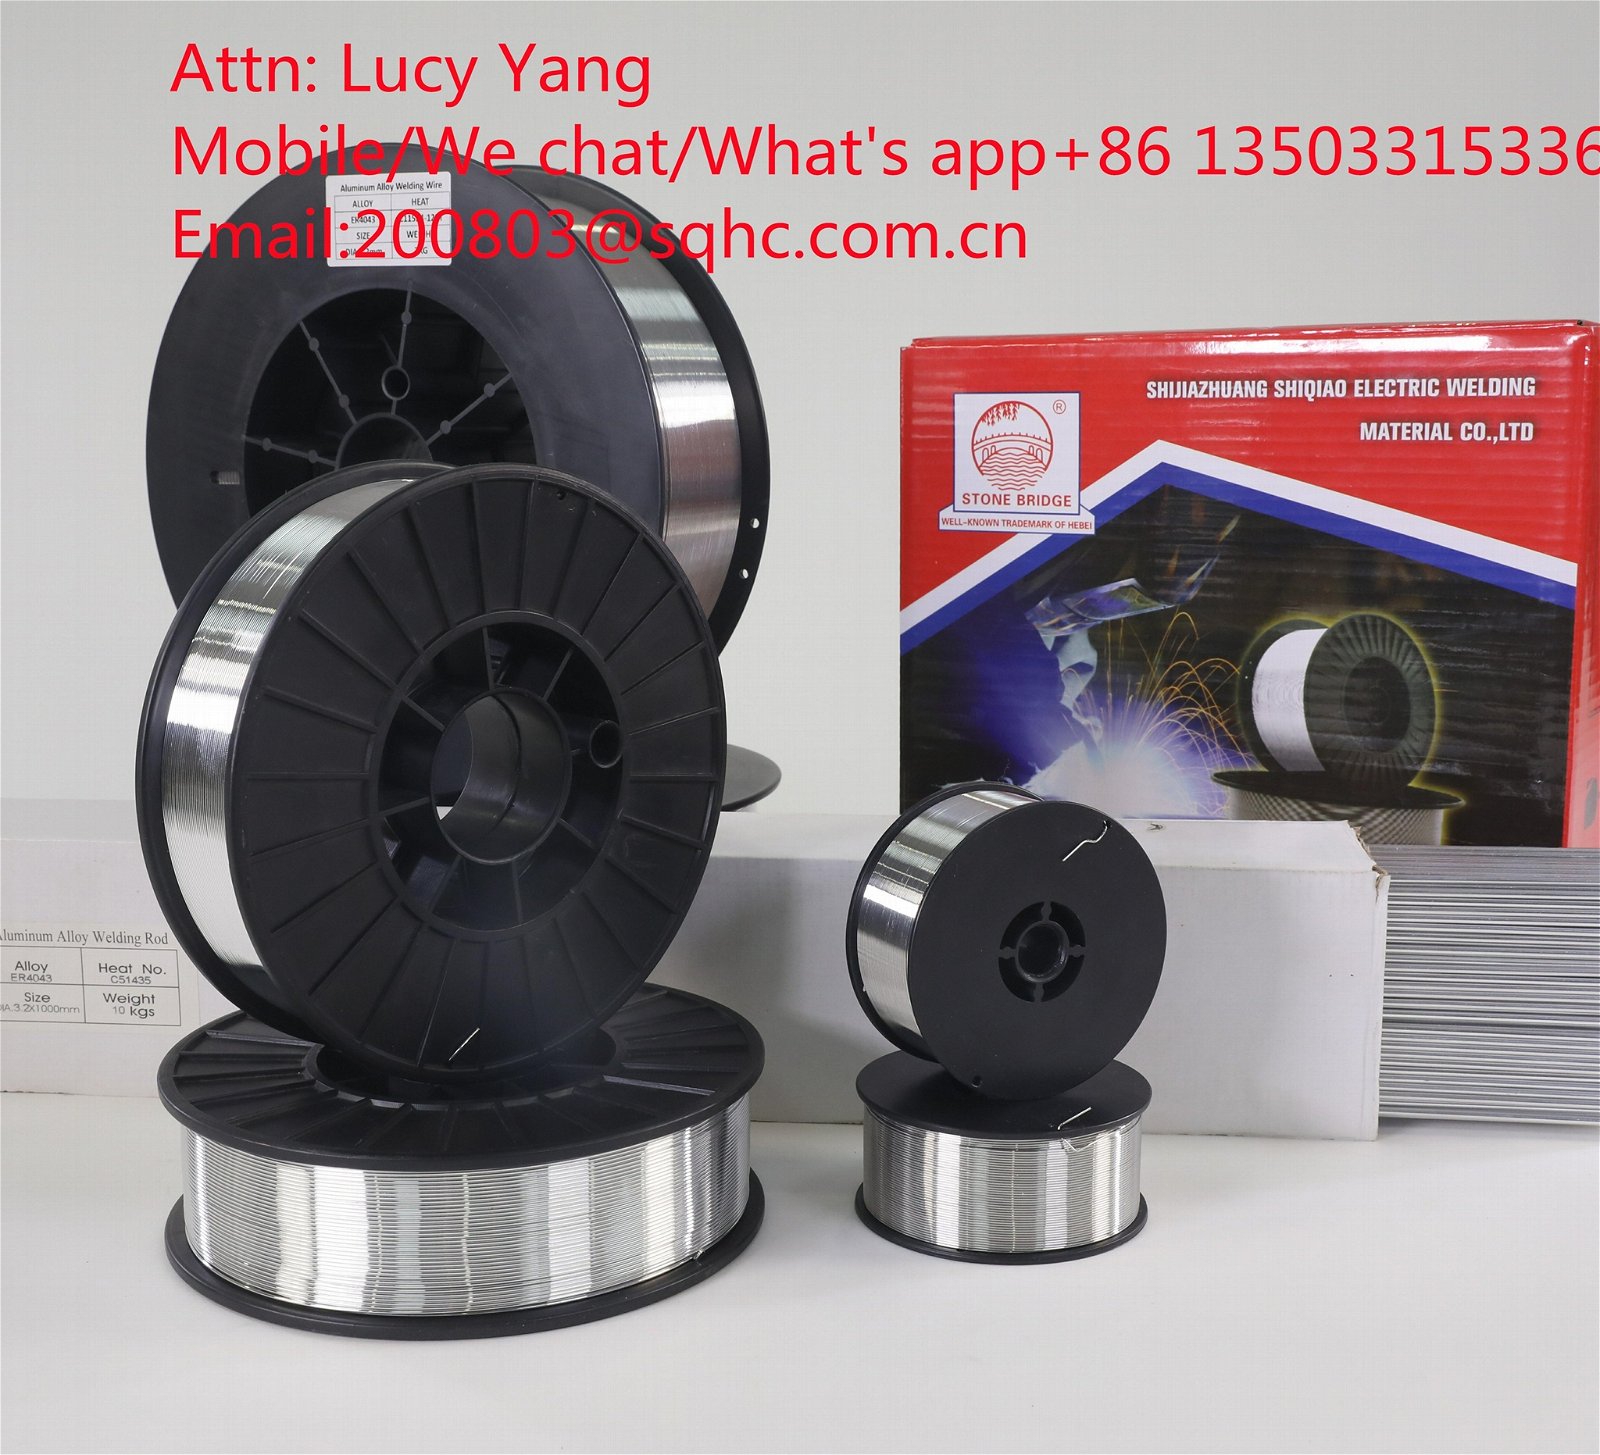 Contact:Lucy by we chat or what's app + 86 13503315336